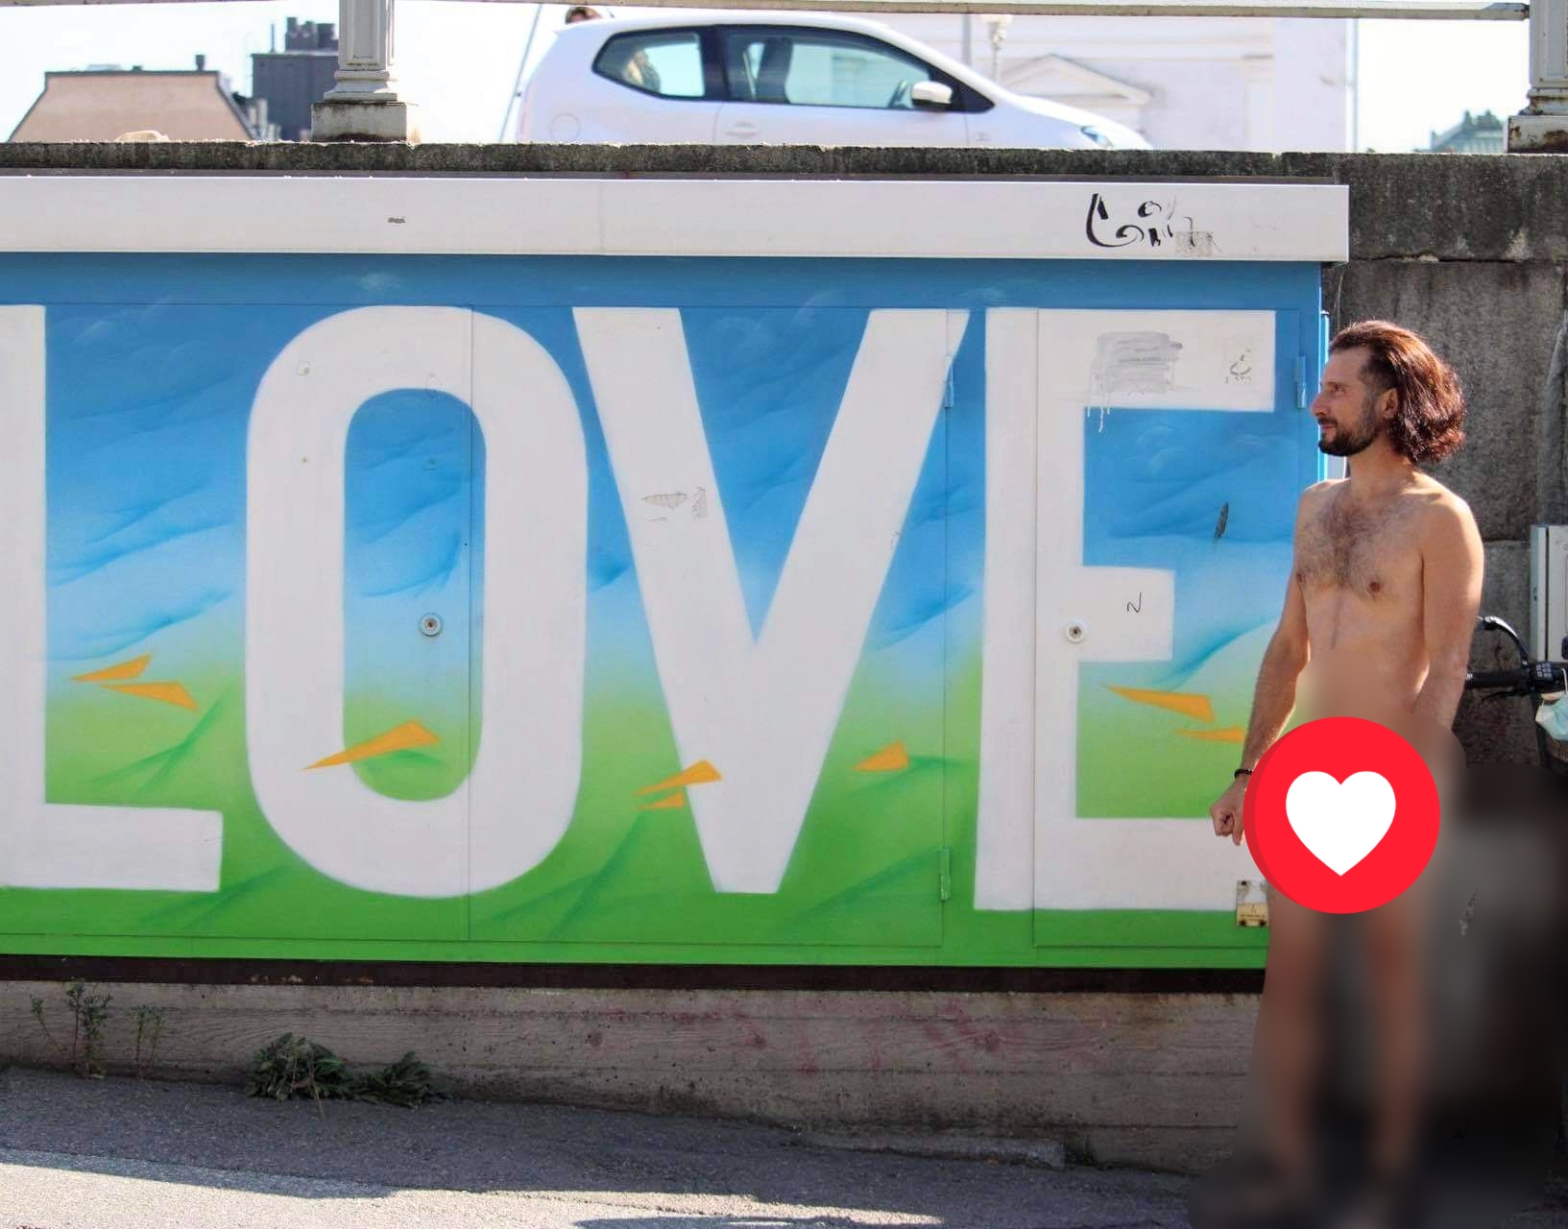 A naked man in front of a graffiti text: "Love"